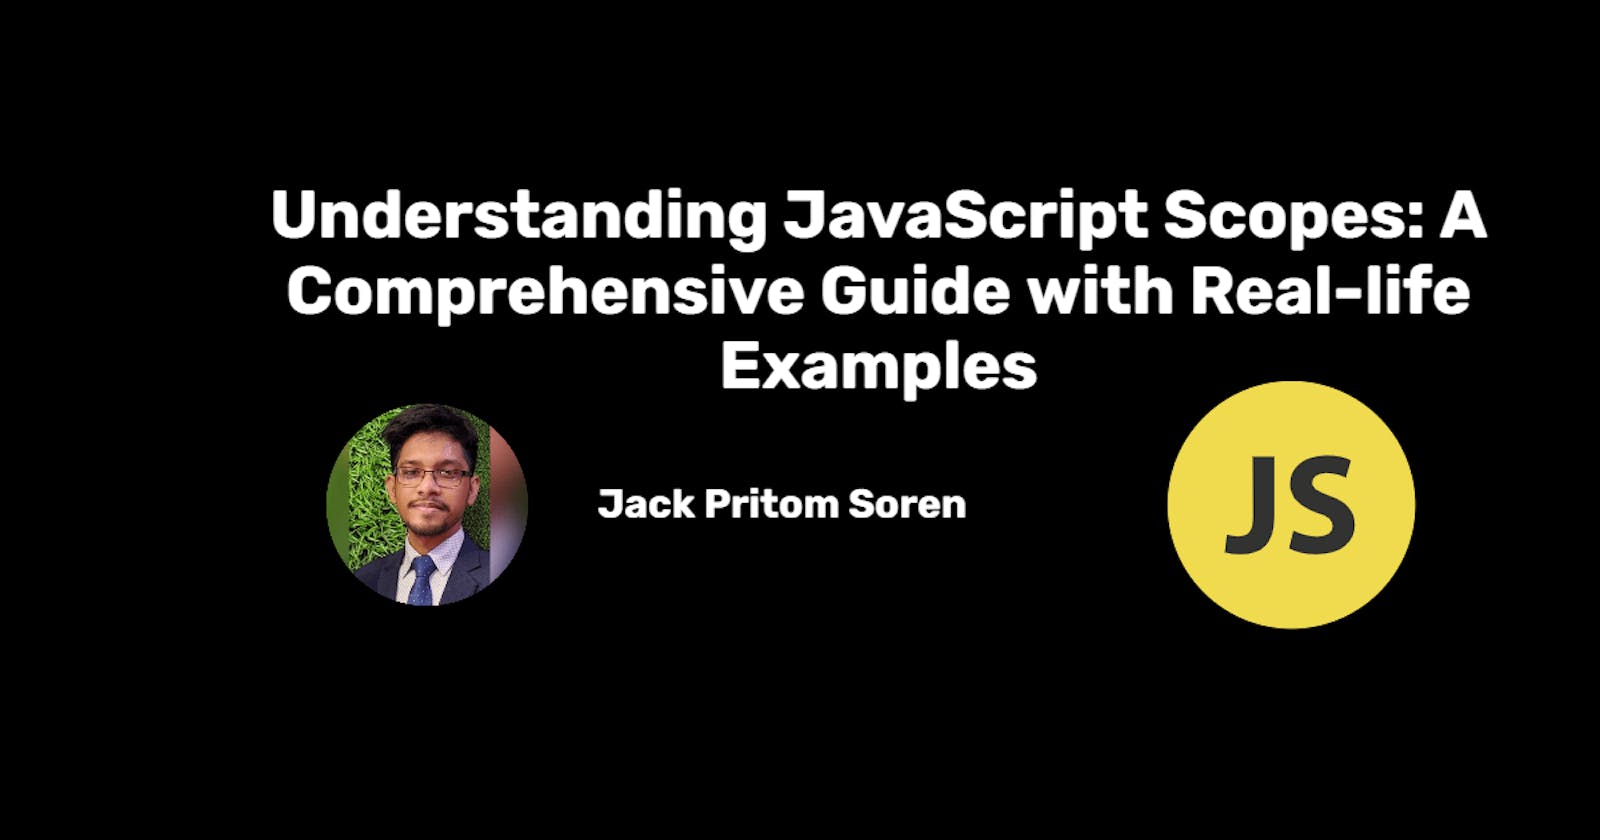 Understanding JavaScript Scopes: A Comprehensive Guide with Real-life Examples